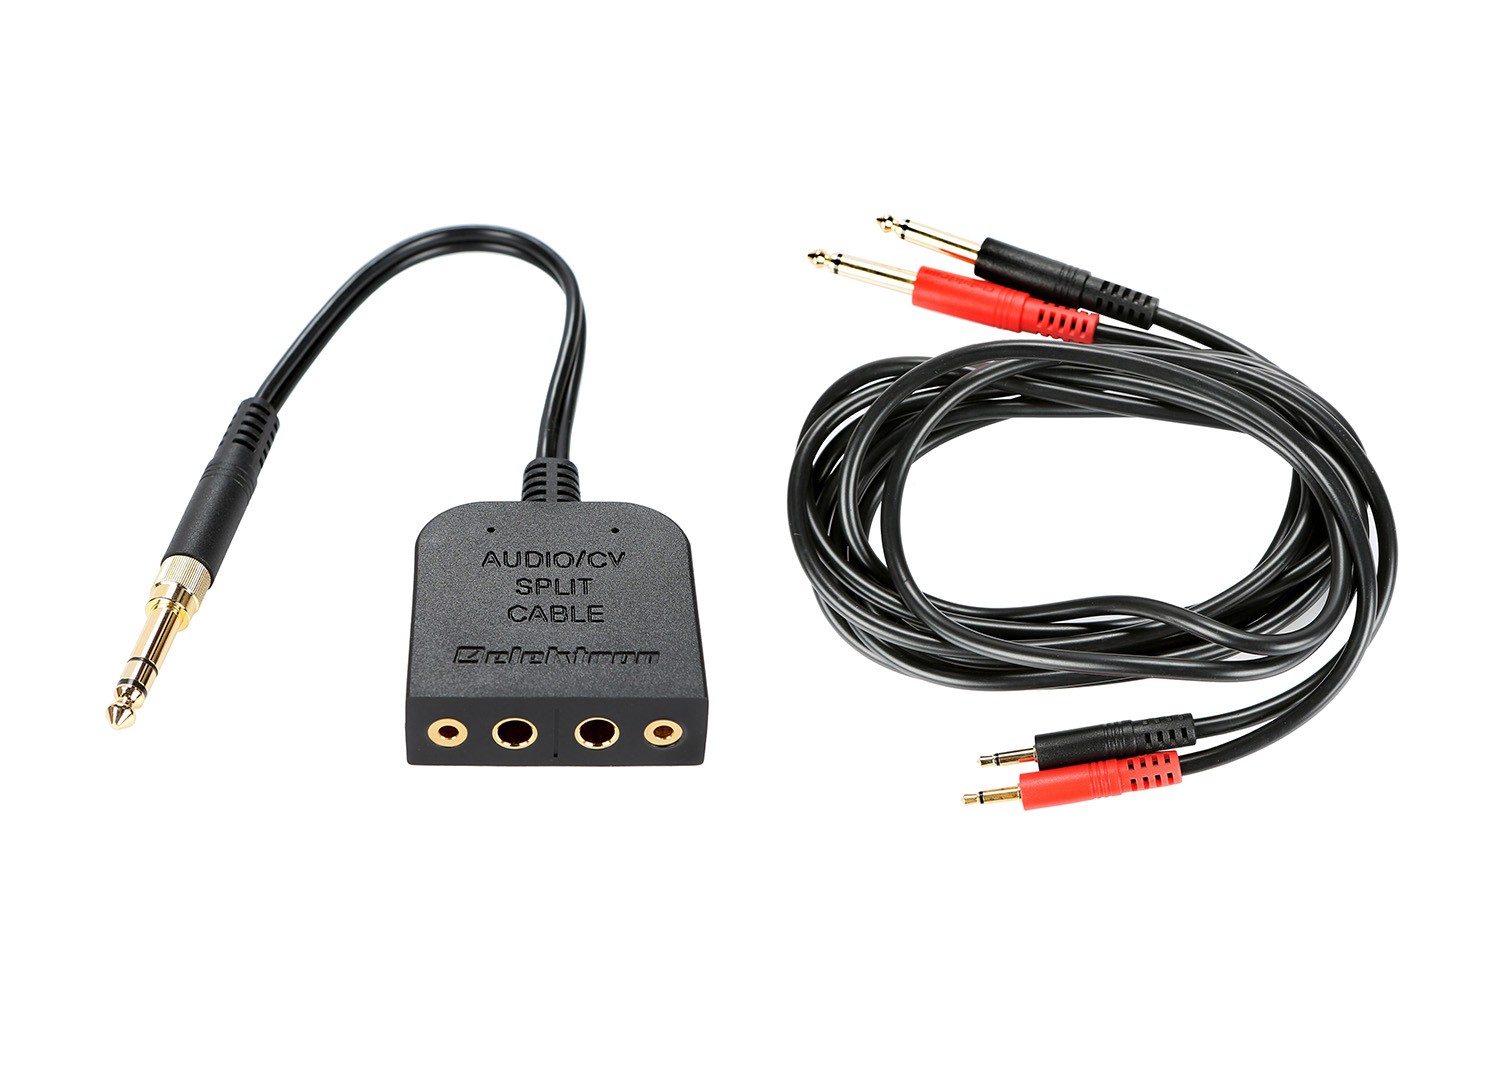 Review: Audio Cable Kit – A Comprehensive Analysis